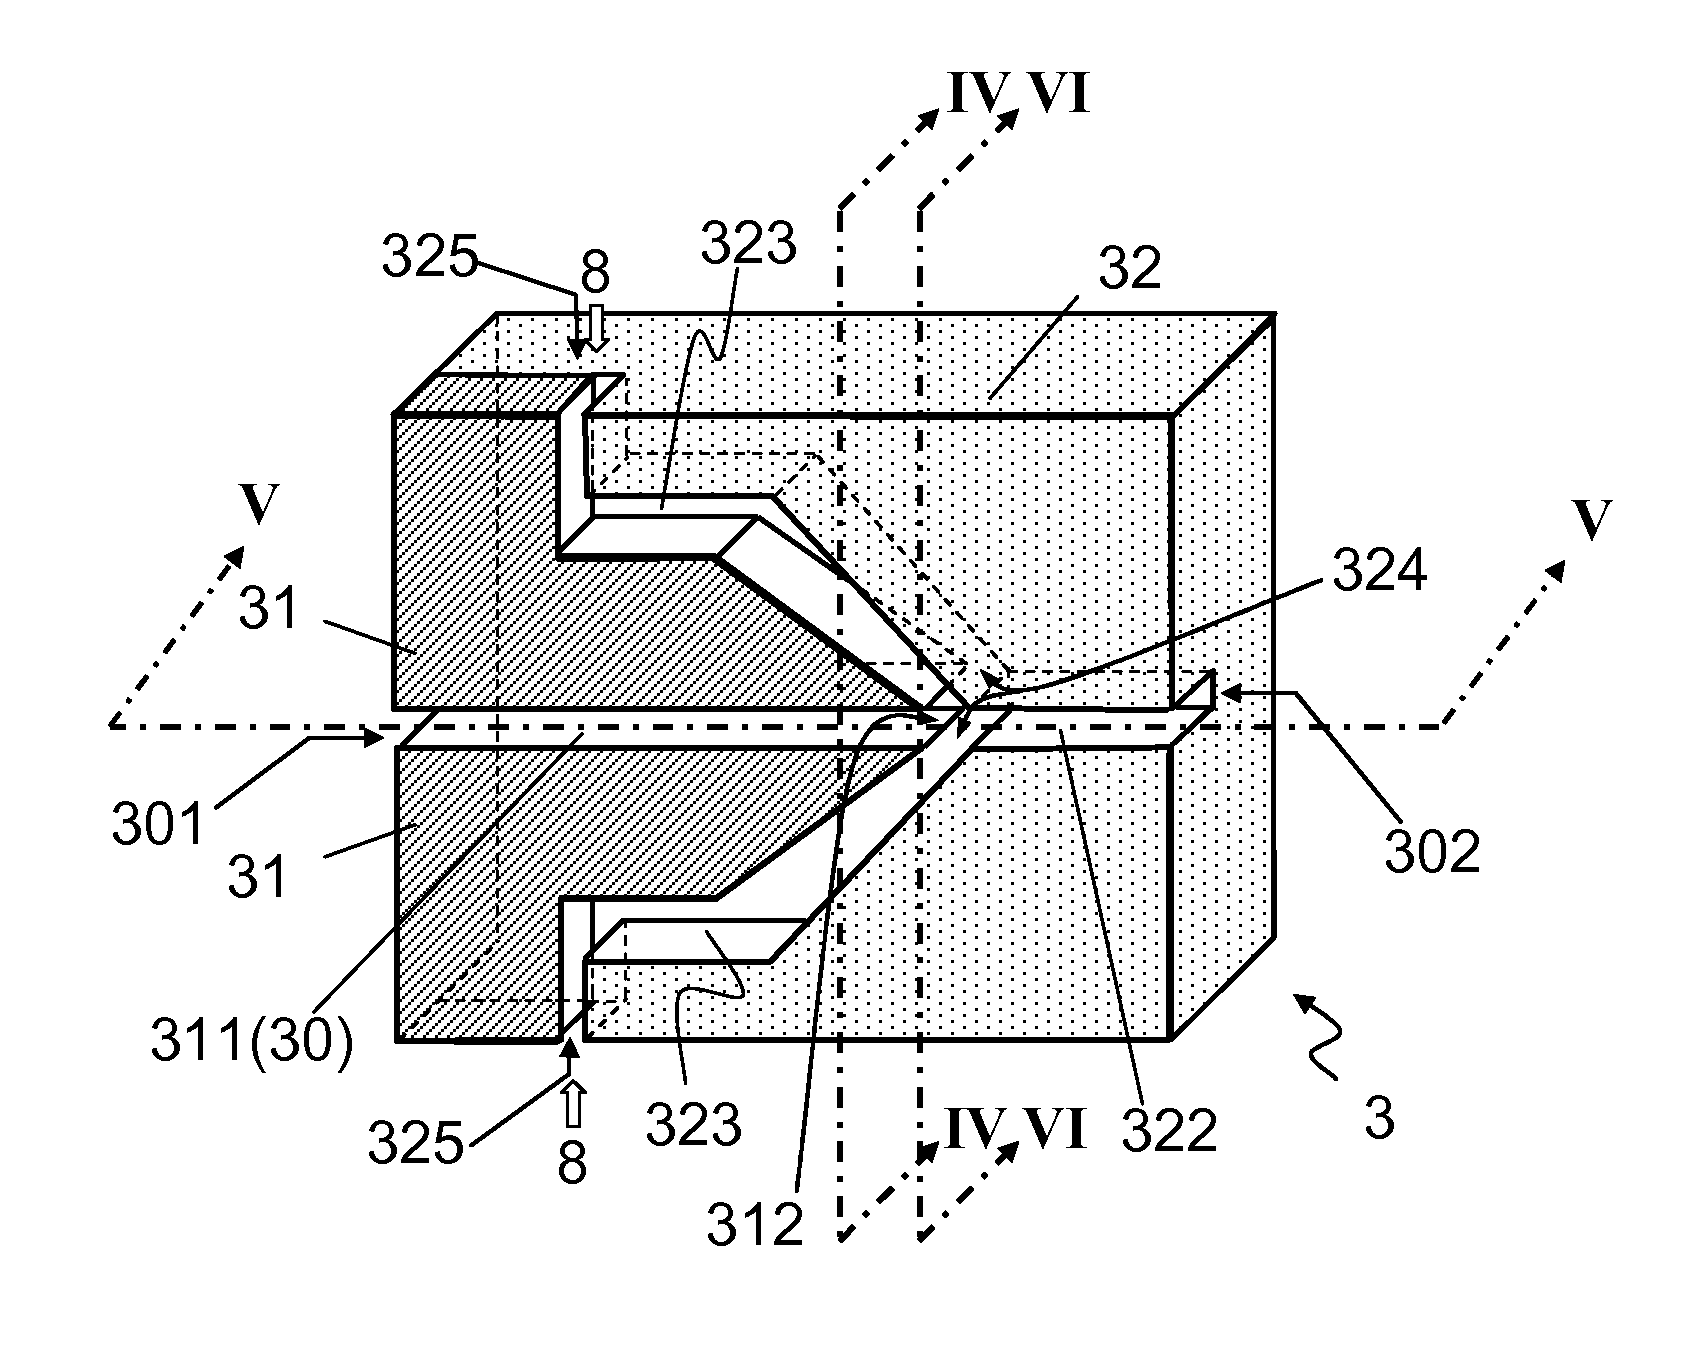 Impregnation Assembly and Method for Manufacturing a Composite Structure Reinforced with Long Fibers